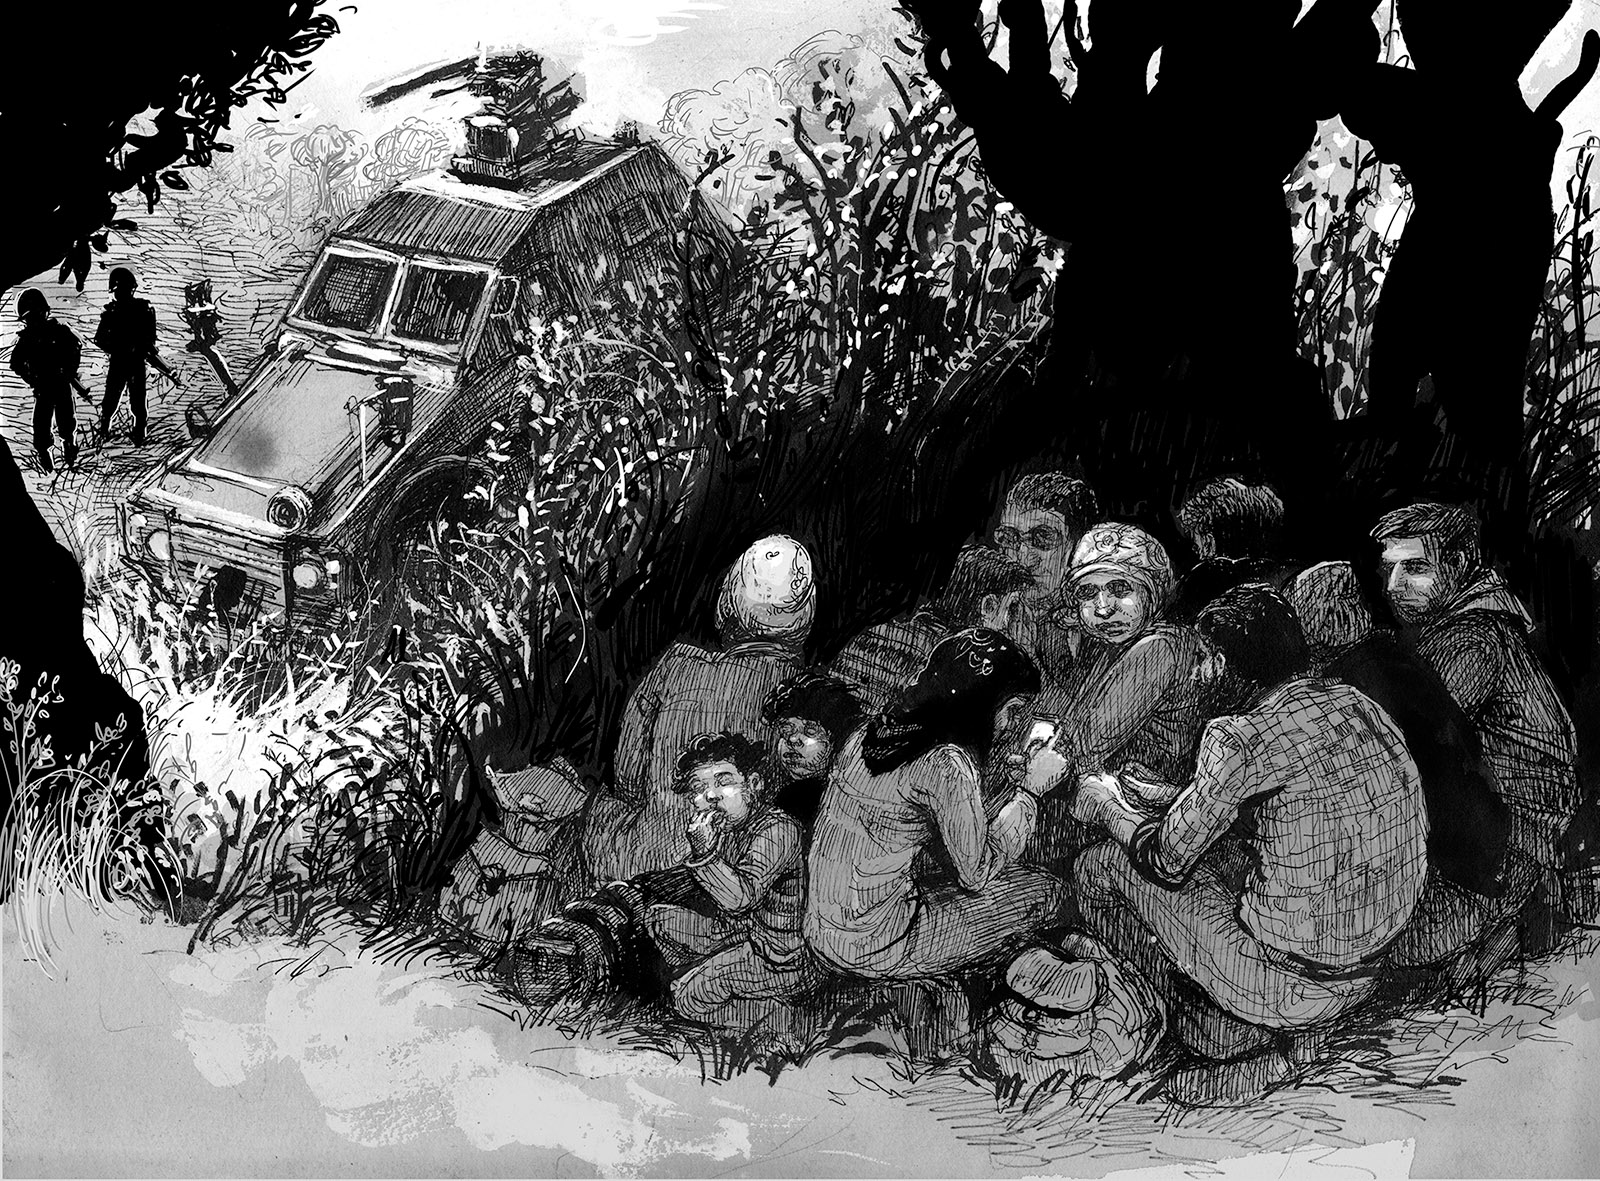 Syrian refugees hiding from Turkish border guards near Afrin, northern Syria, June 2015; illustration from Marwan Hisham and Molly Crabapple’s Brothers of the Gun